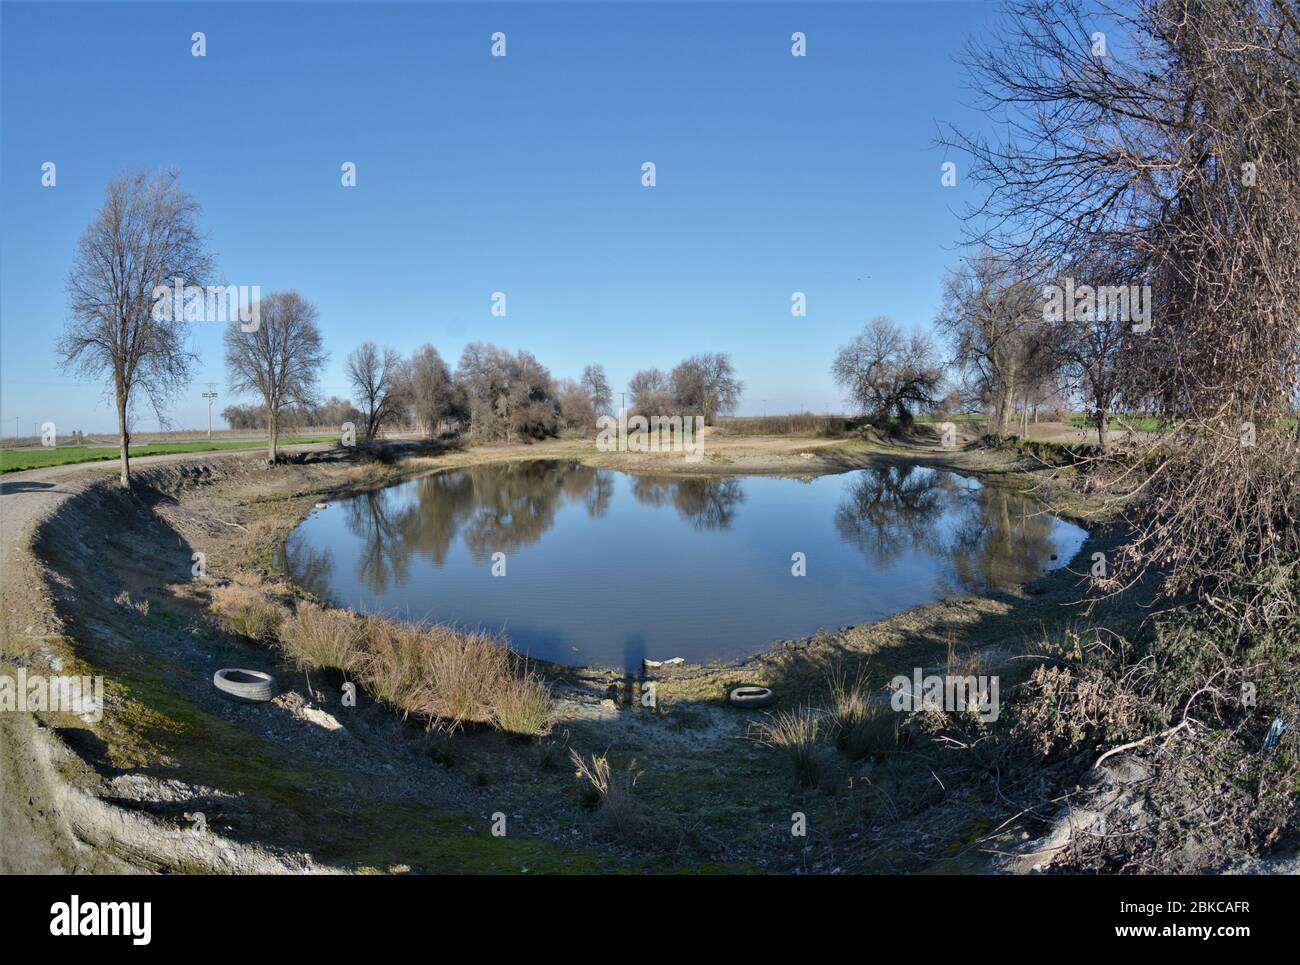 Water retention pond in the central valley of California in the time of ongoing drought in the farming community - no rainwater being saved Stock Photo